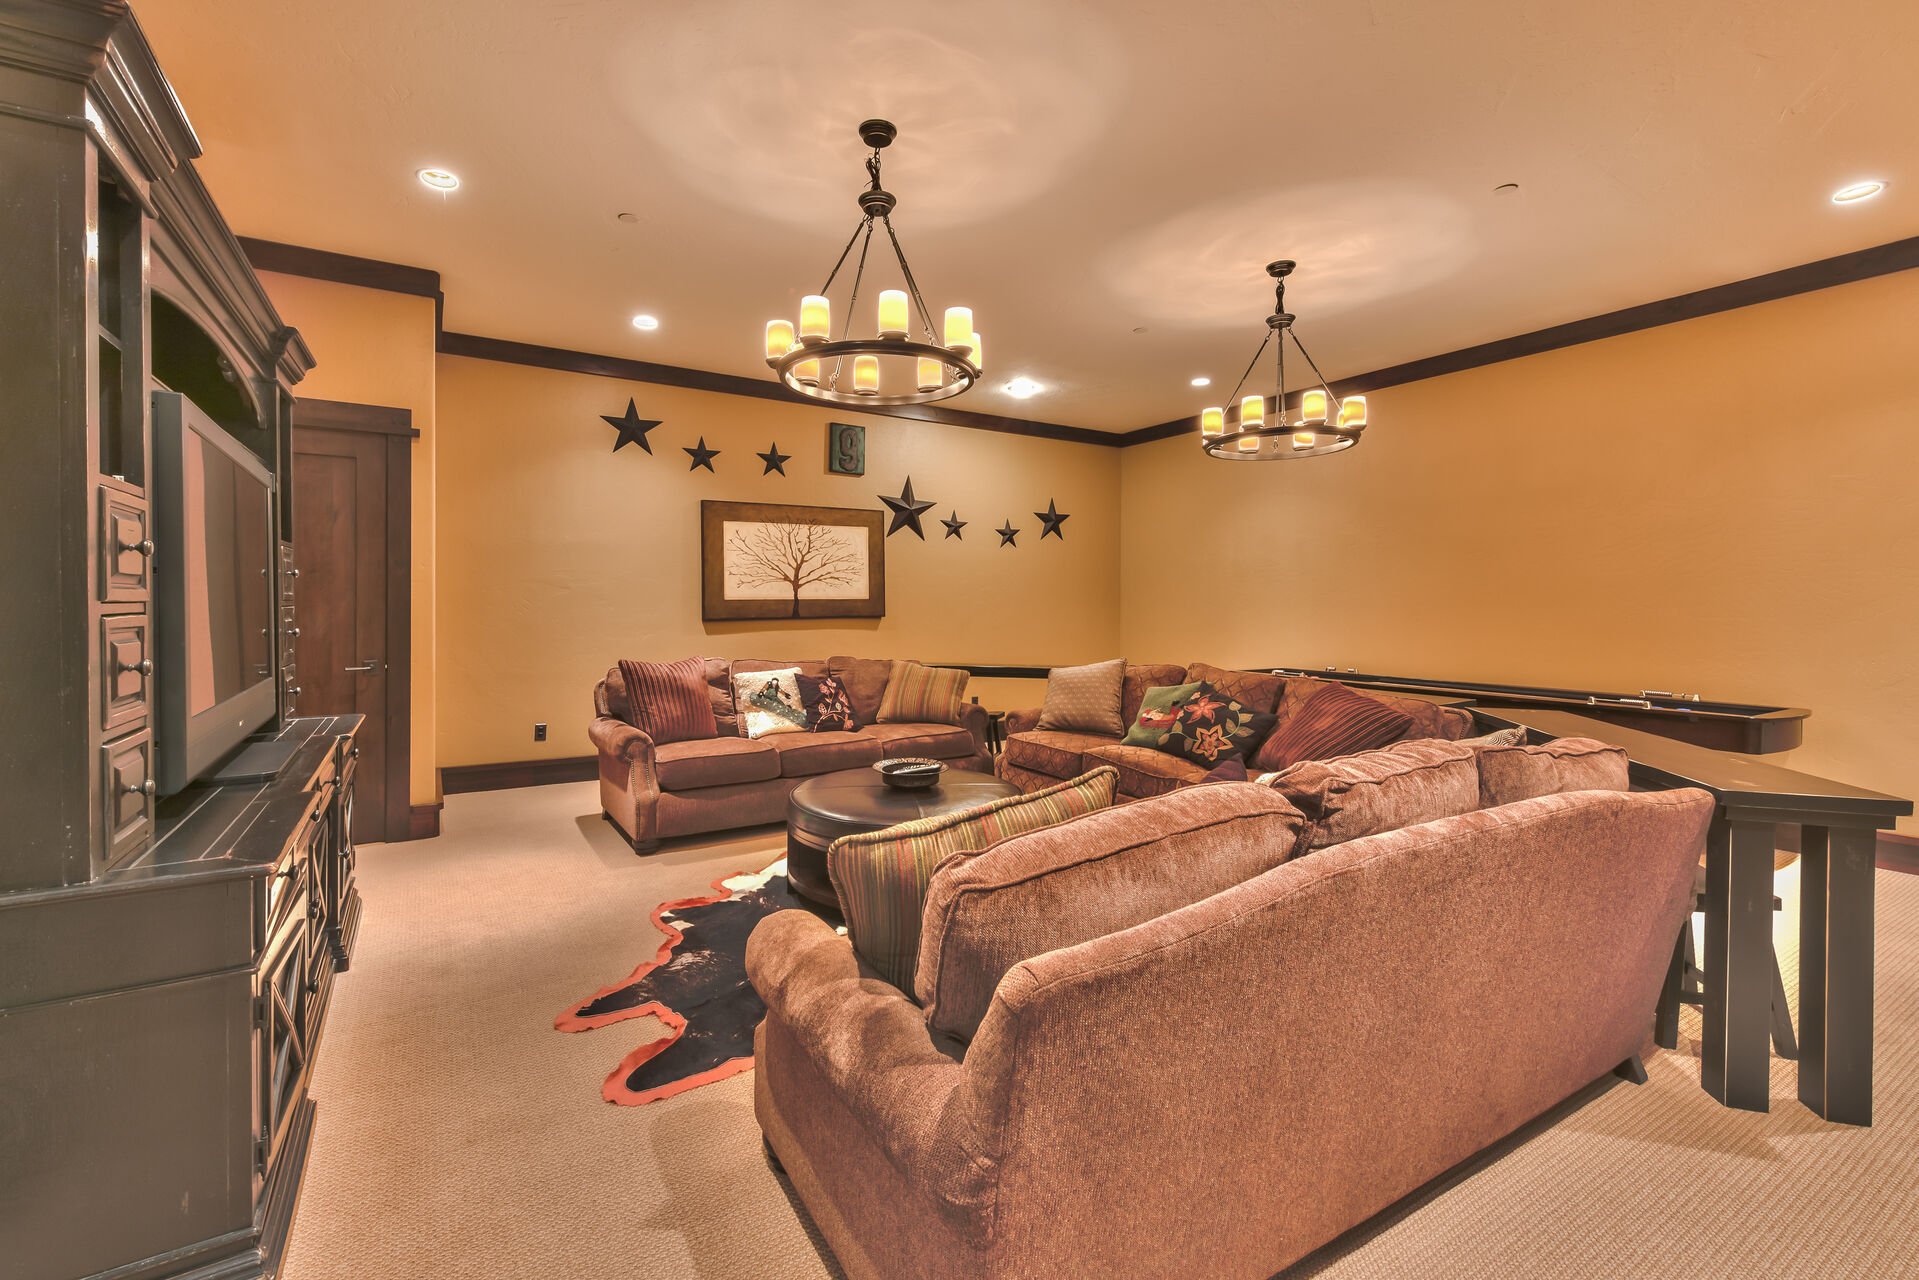 1st Level Theater/Game Room with Comfortable Furnishings, Including a Sleeper Sofa, Large Flat Screen TV and a Shuffleboard Table